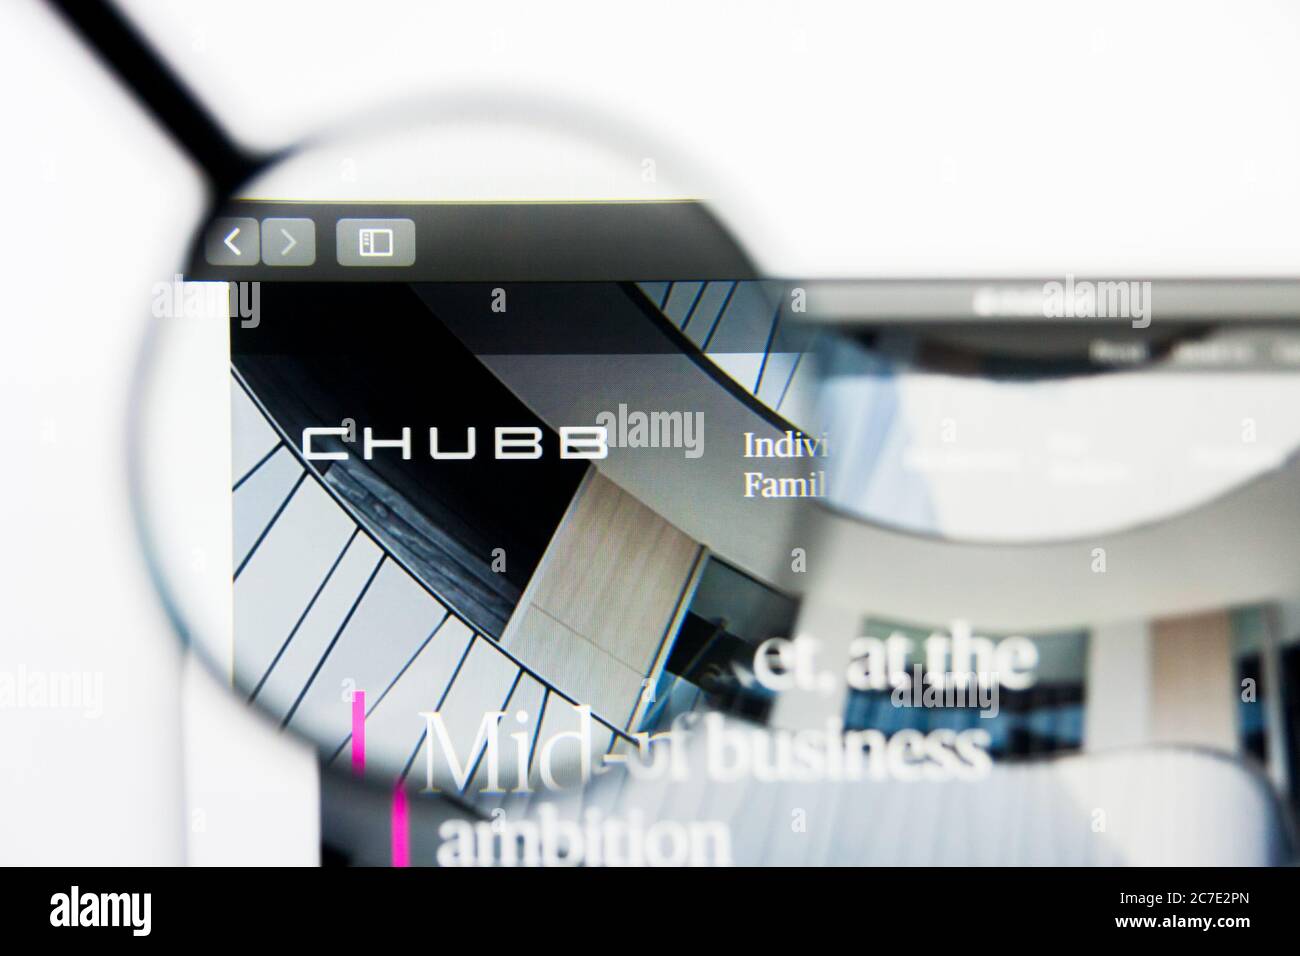 Los Angeles, California, USA - 25 March 2019: Illustrative Editorial of Chubb website homepage. Chubb logo visible on display screen. Stock Photo